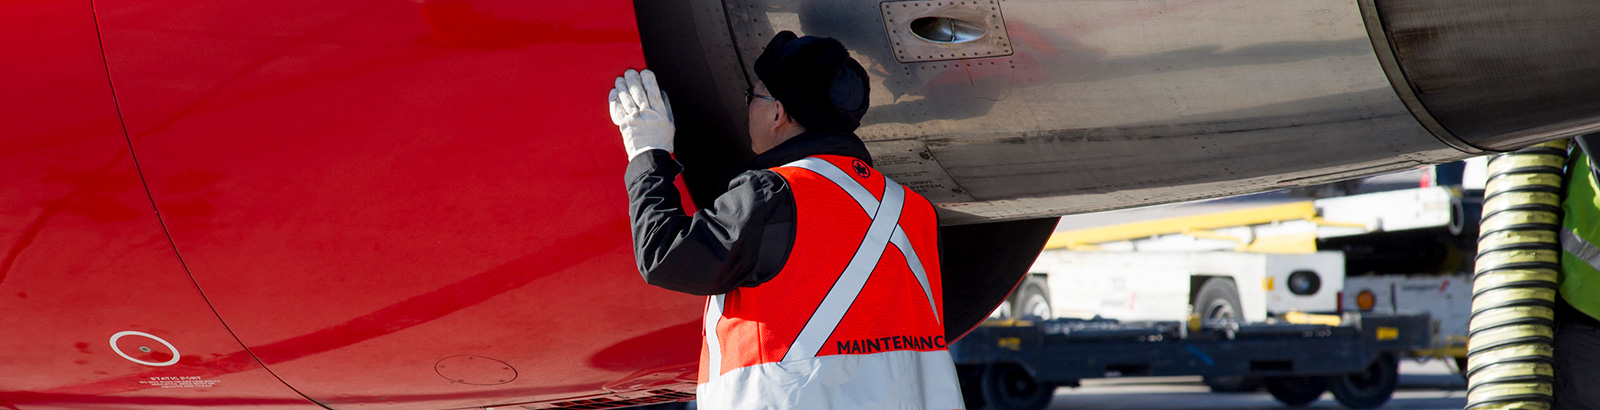 Career Opportunities with Air Canada Maintenance banner image